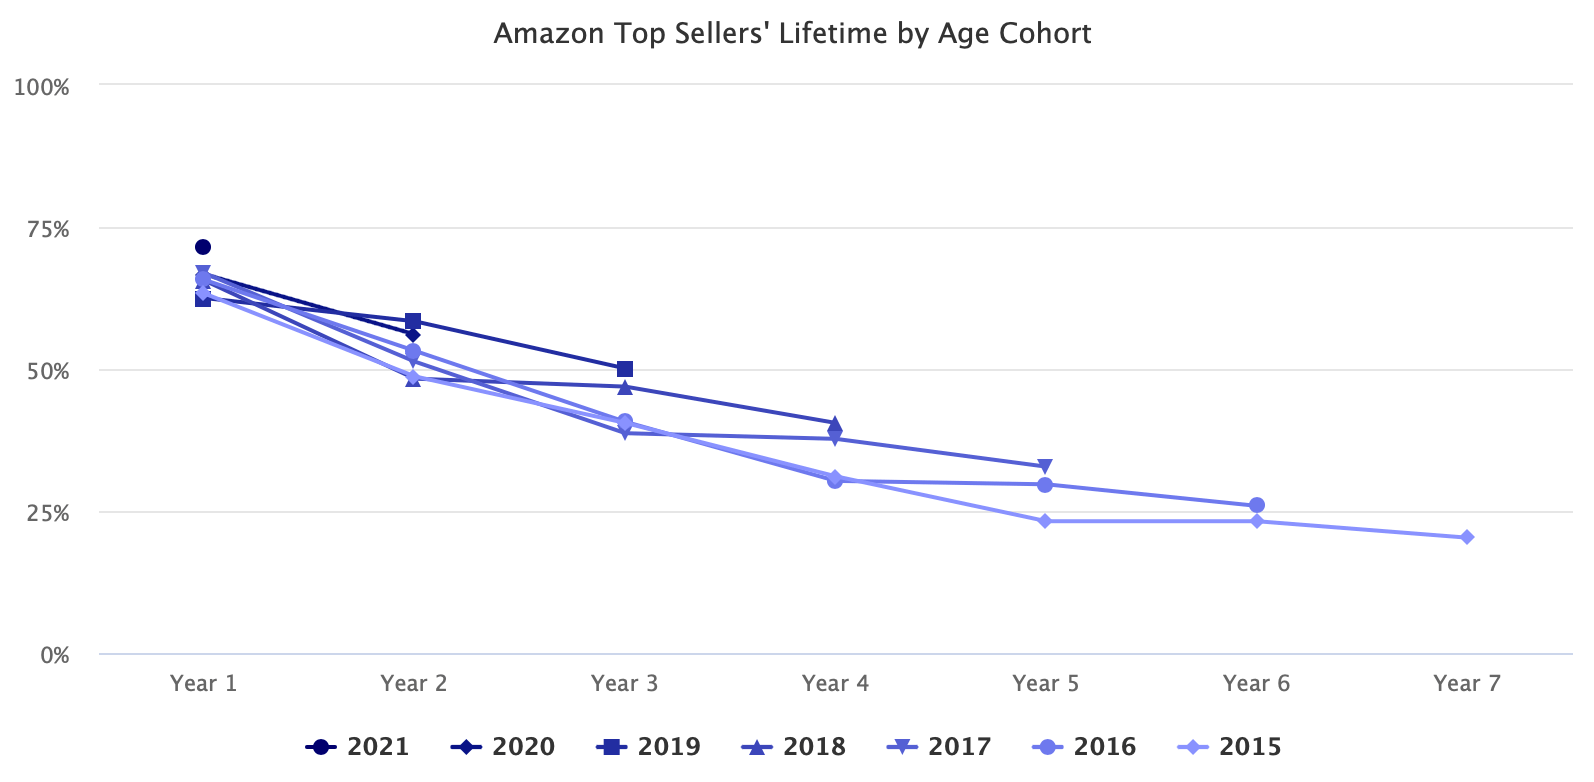 Amazon Top Sellers' Lifetime by Age Cohort